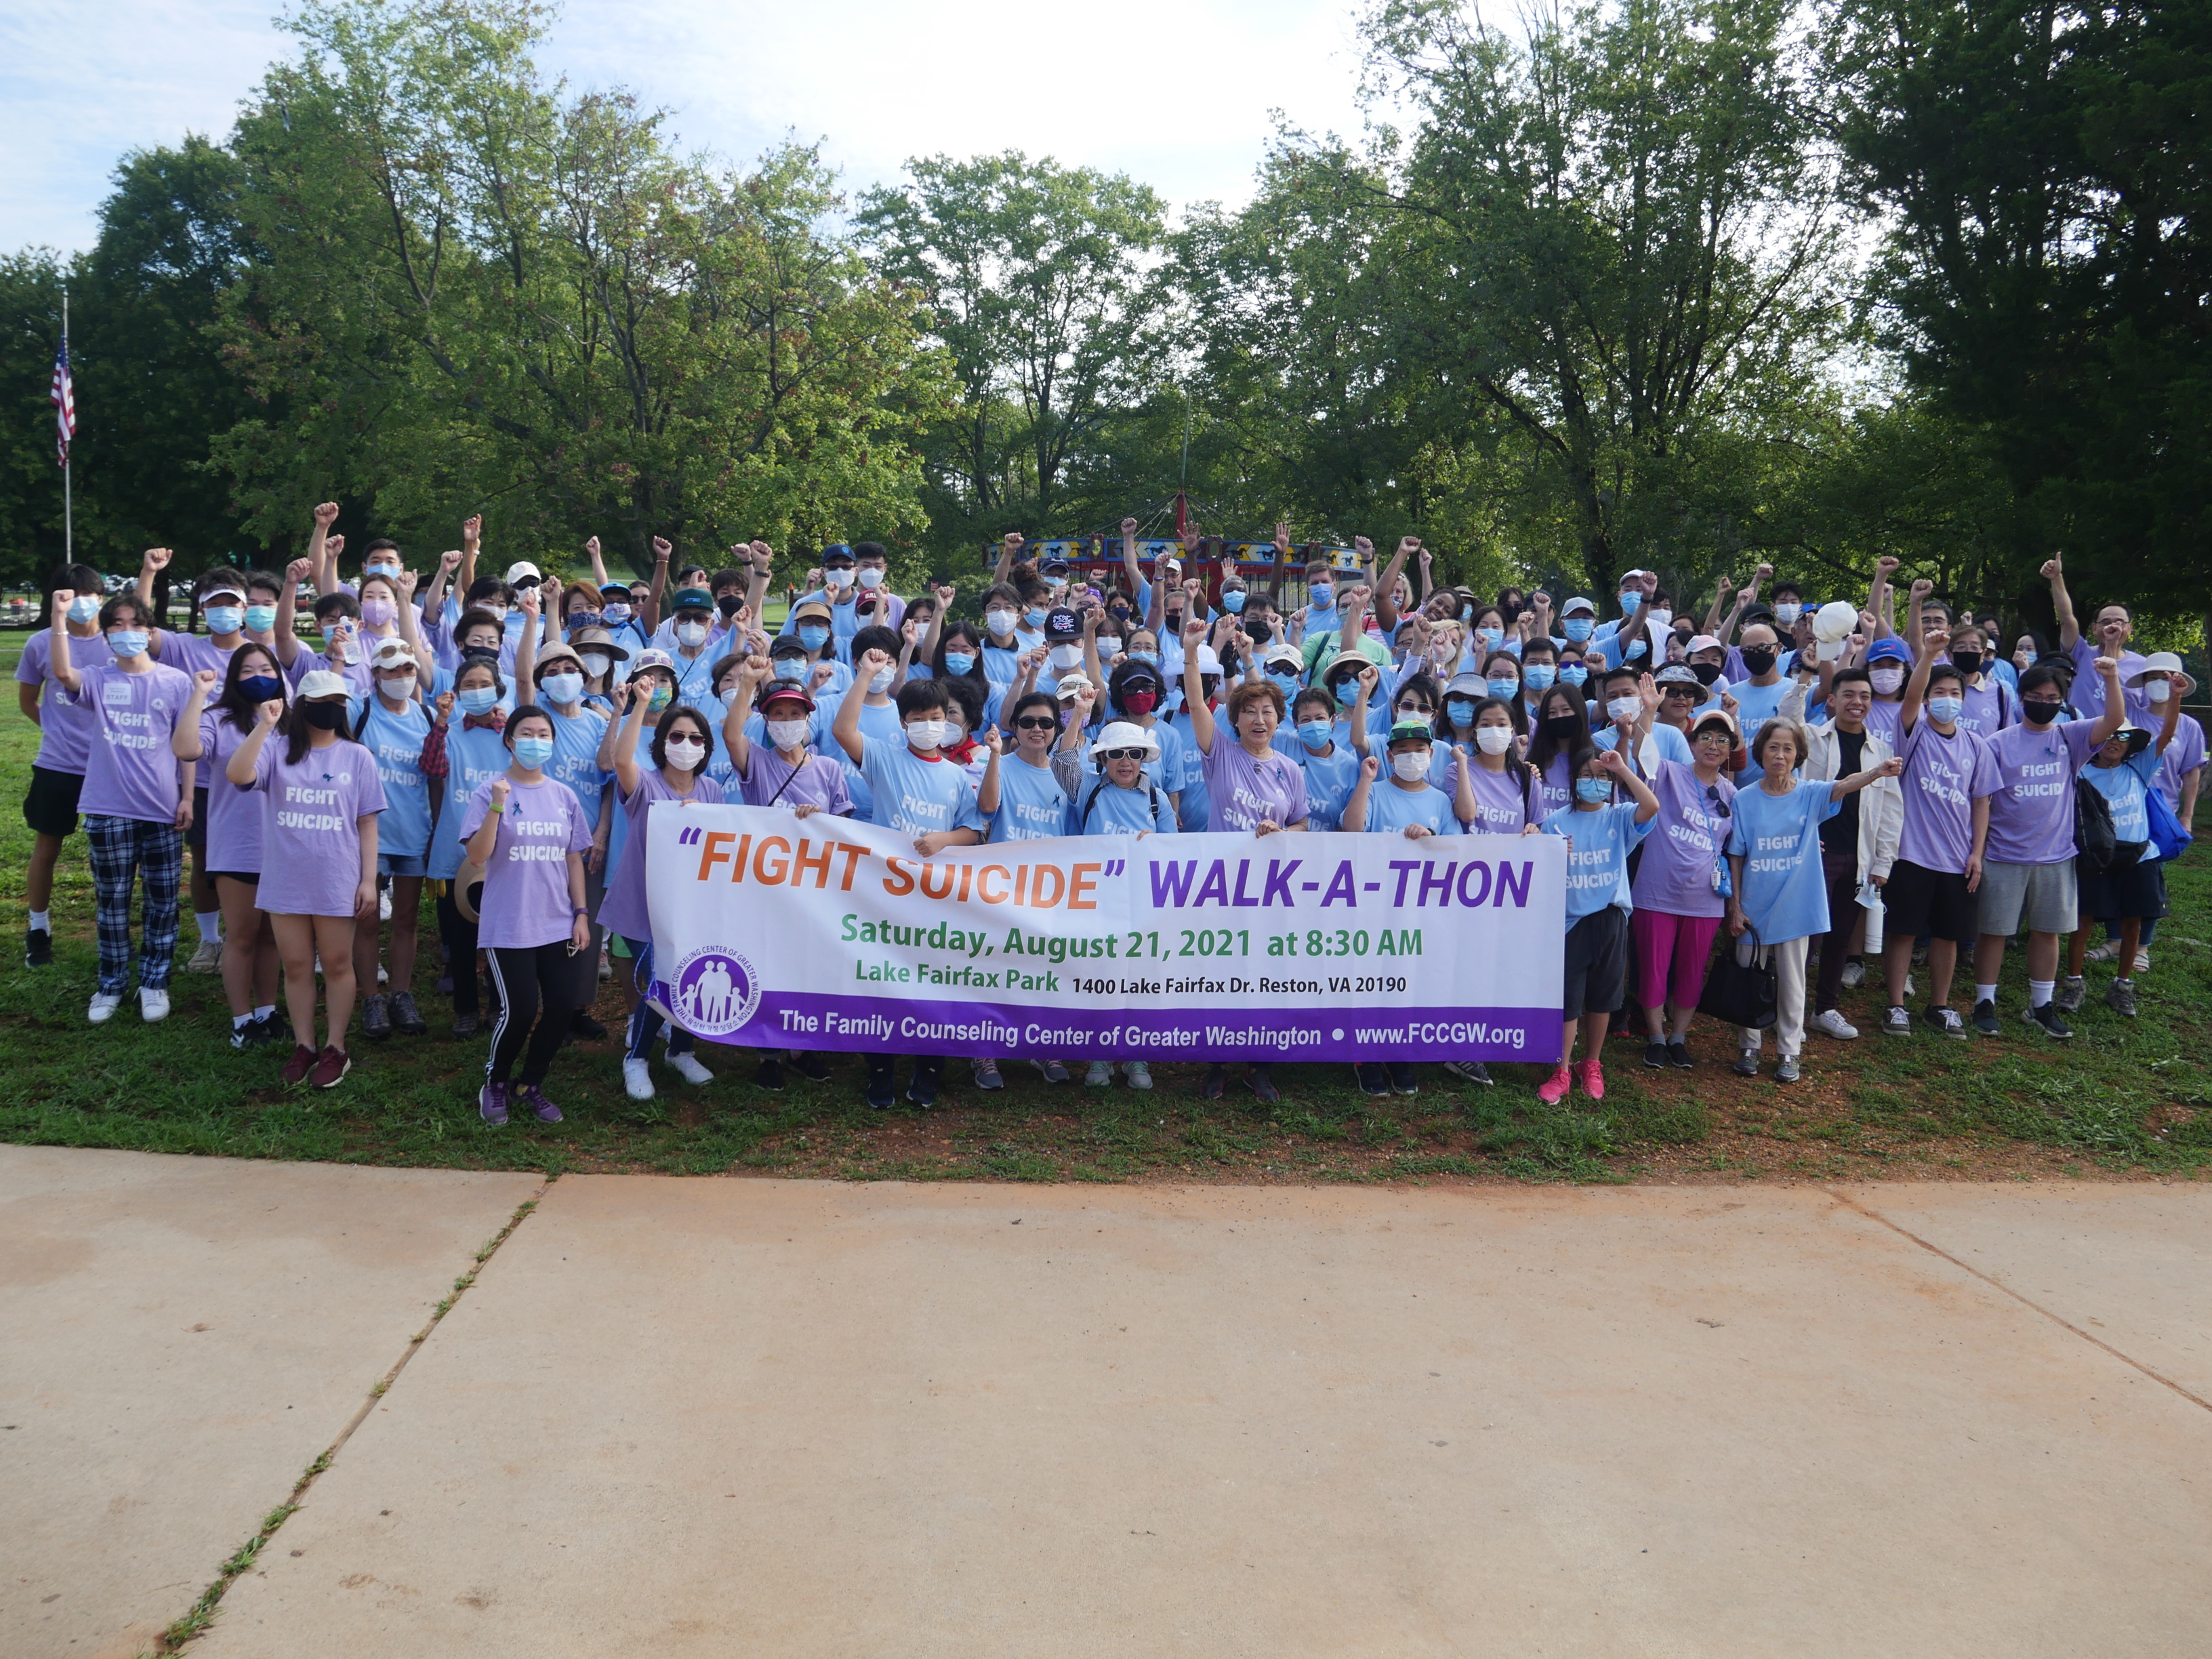 Large group of people outside with a "'Fight Suicide' Walk-a-thon" banner